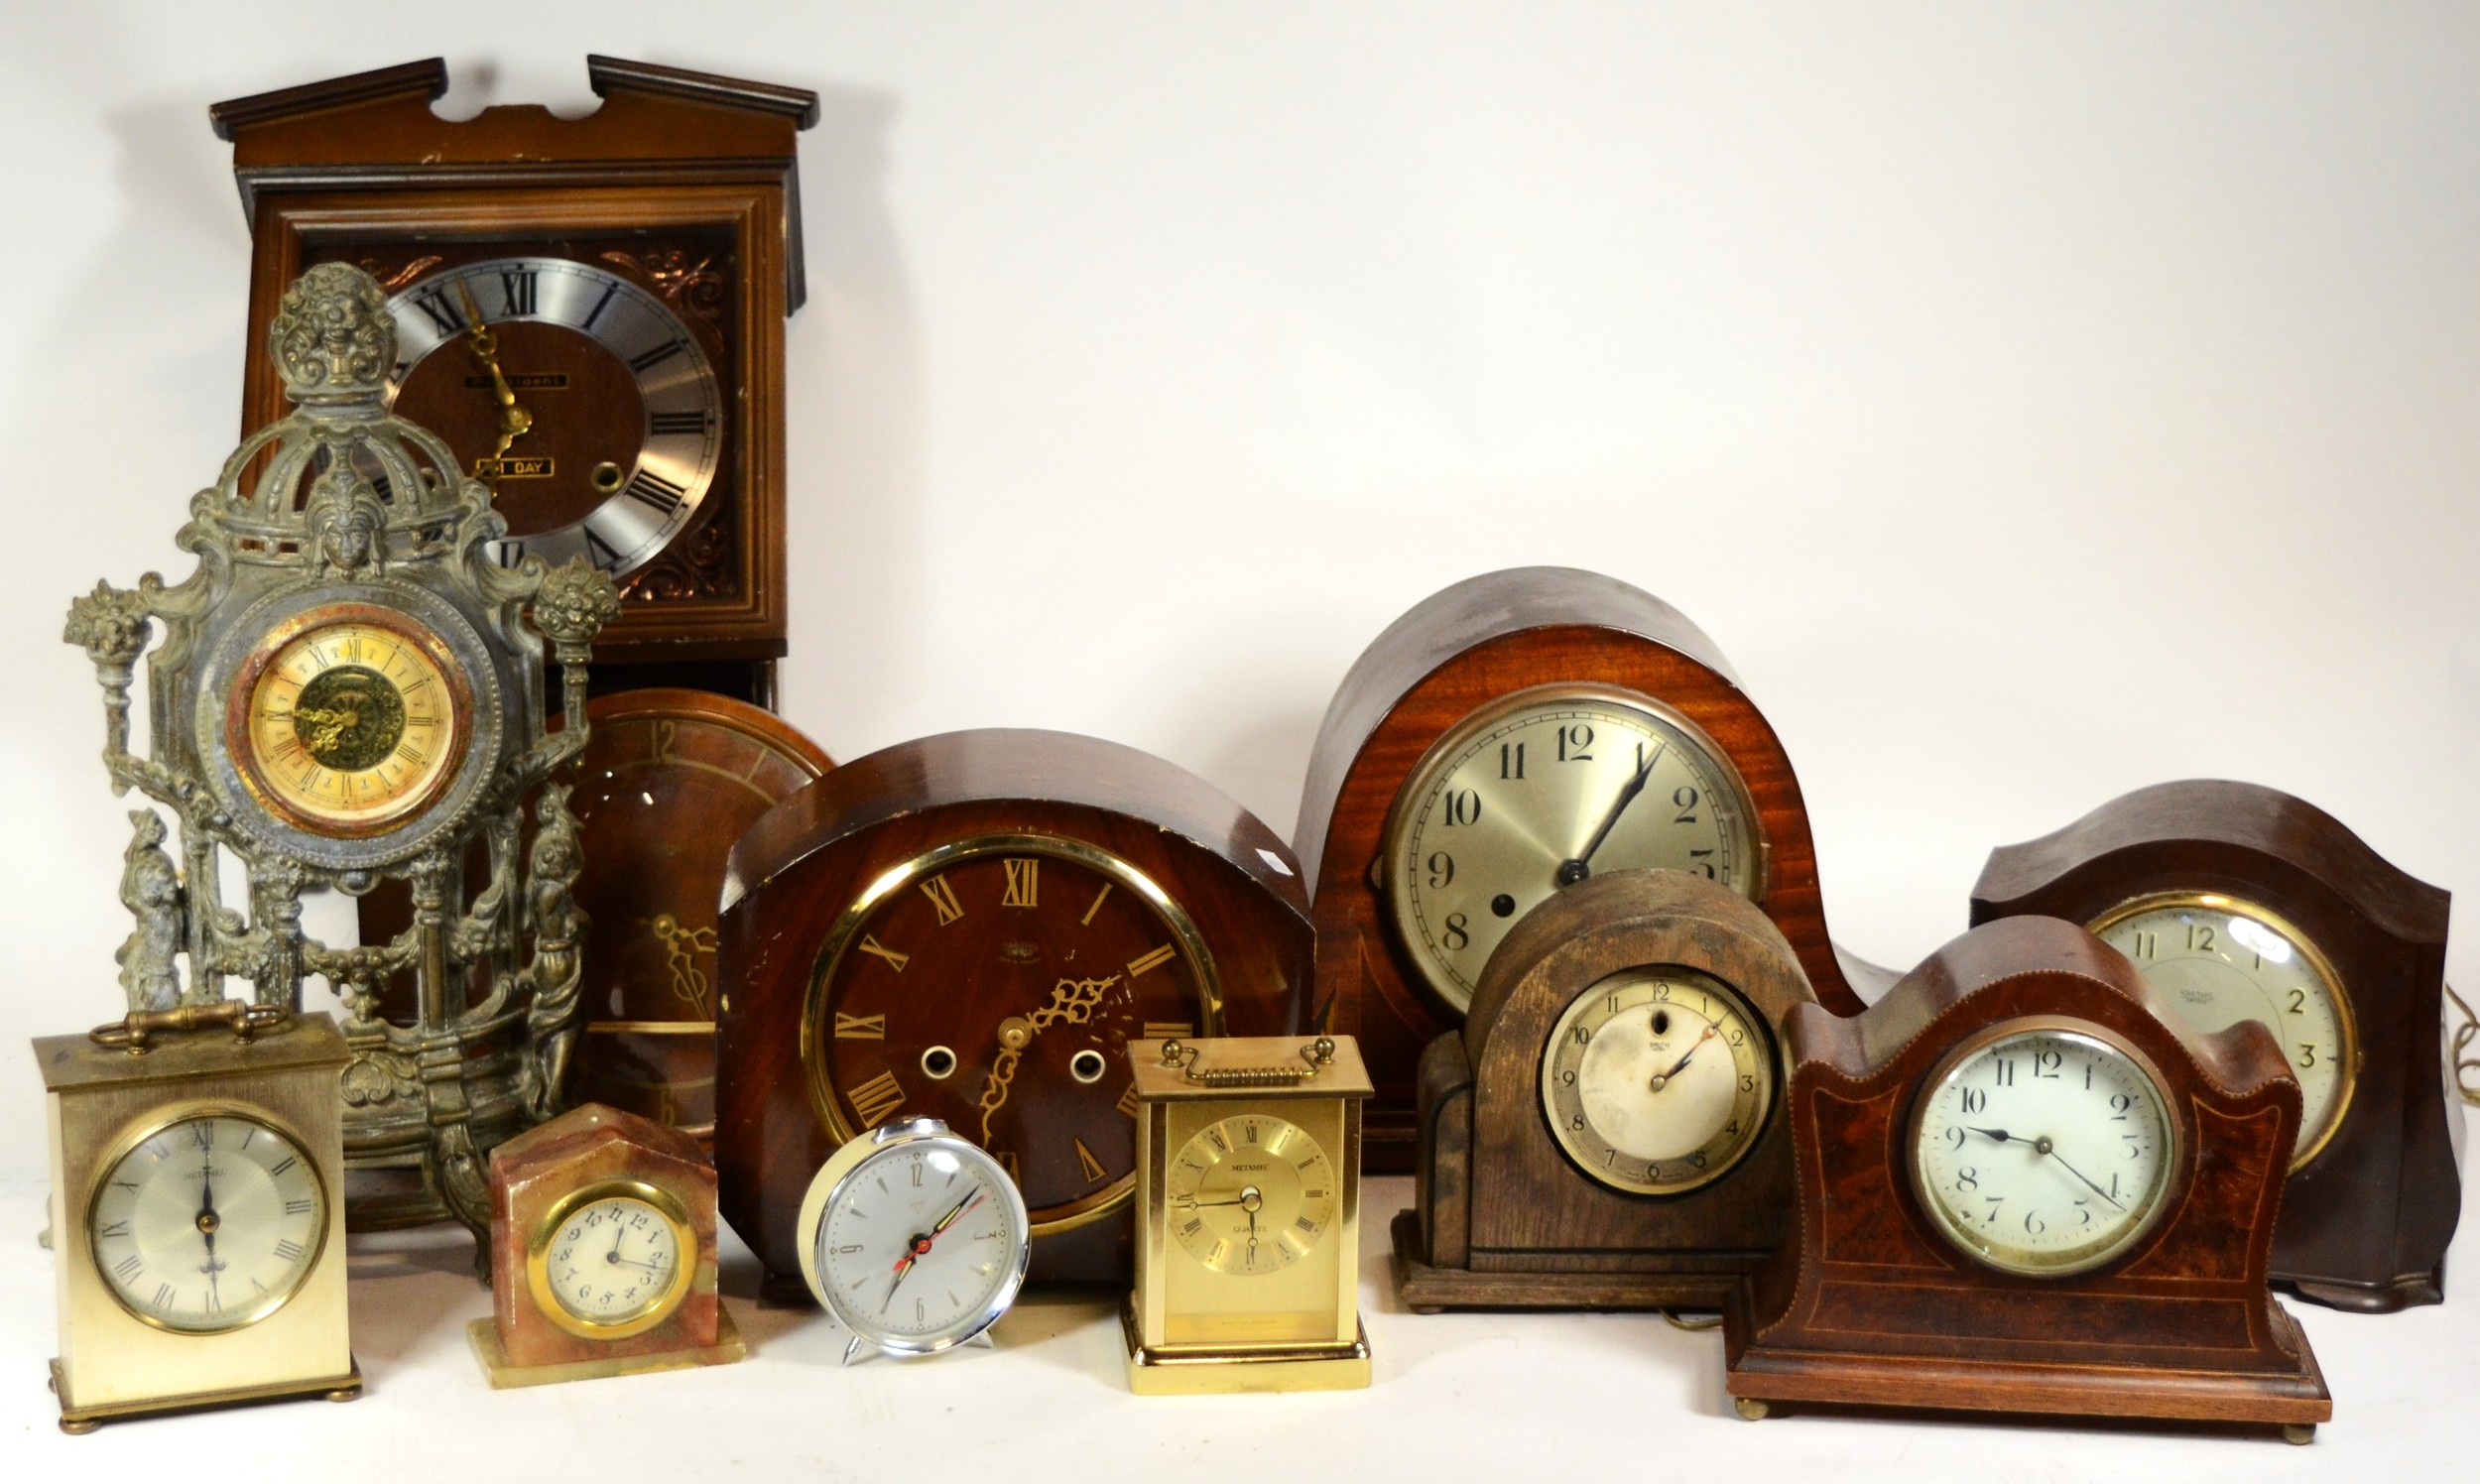 A collection of mid 20th century and later mantel clocks, having manual and quartz movements, in